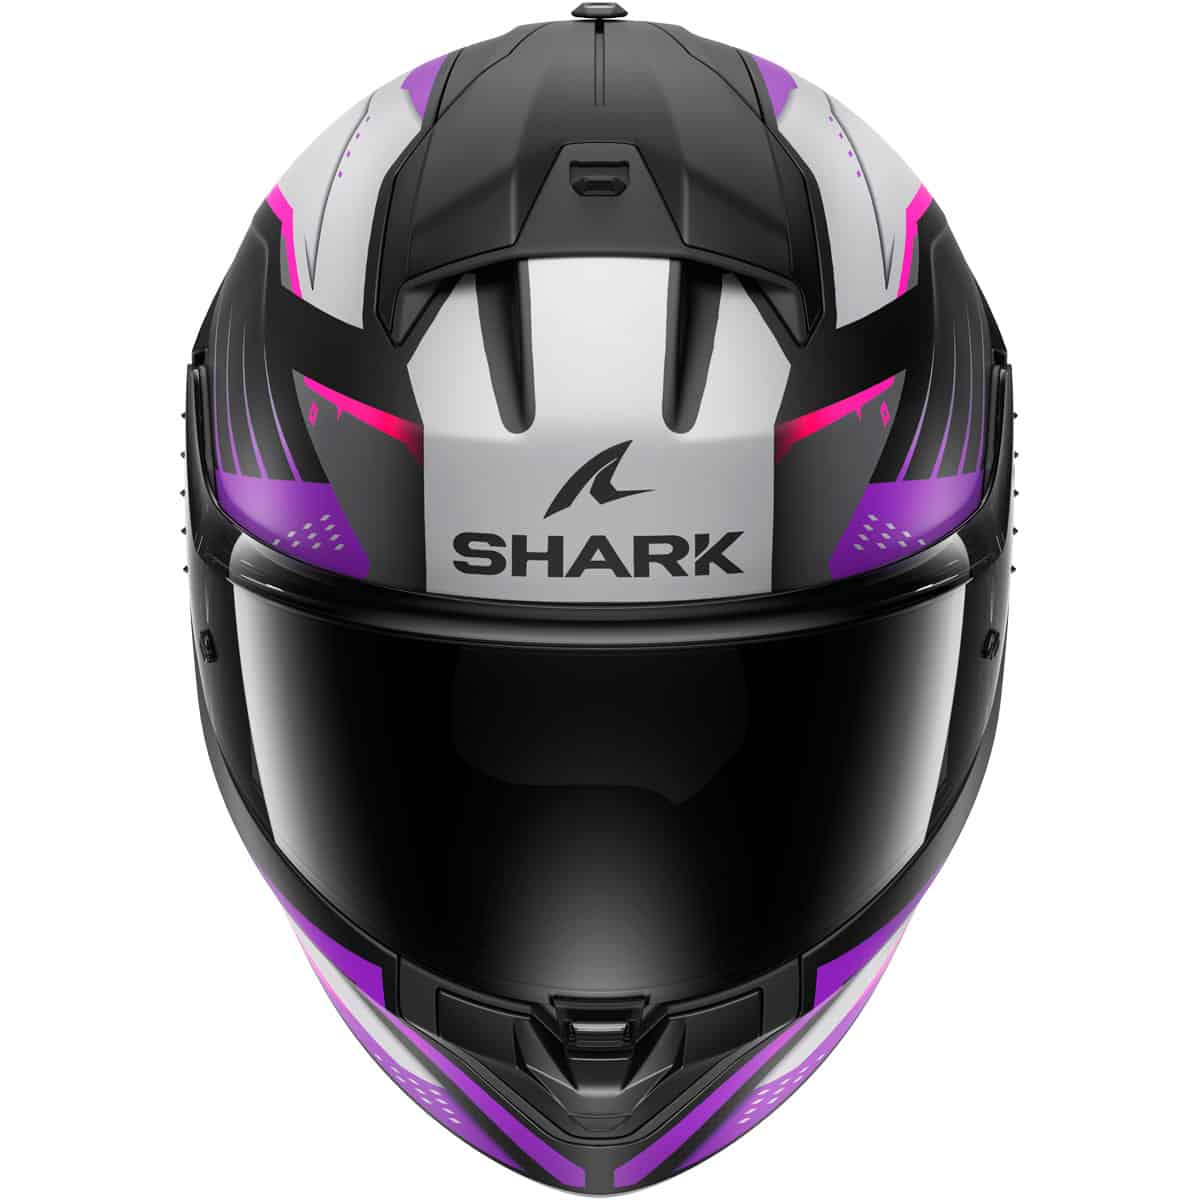 Experience a ride like no other with the Shark Ridill 2 Helmet. This ladies helmet features an all-new design and exceptional features, combining streetwear look air inlets